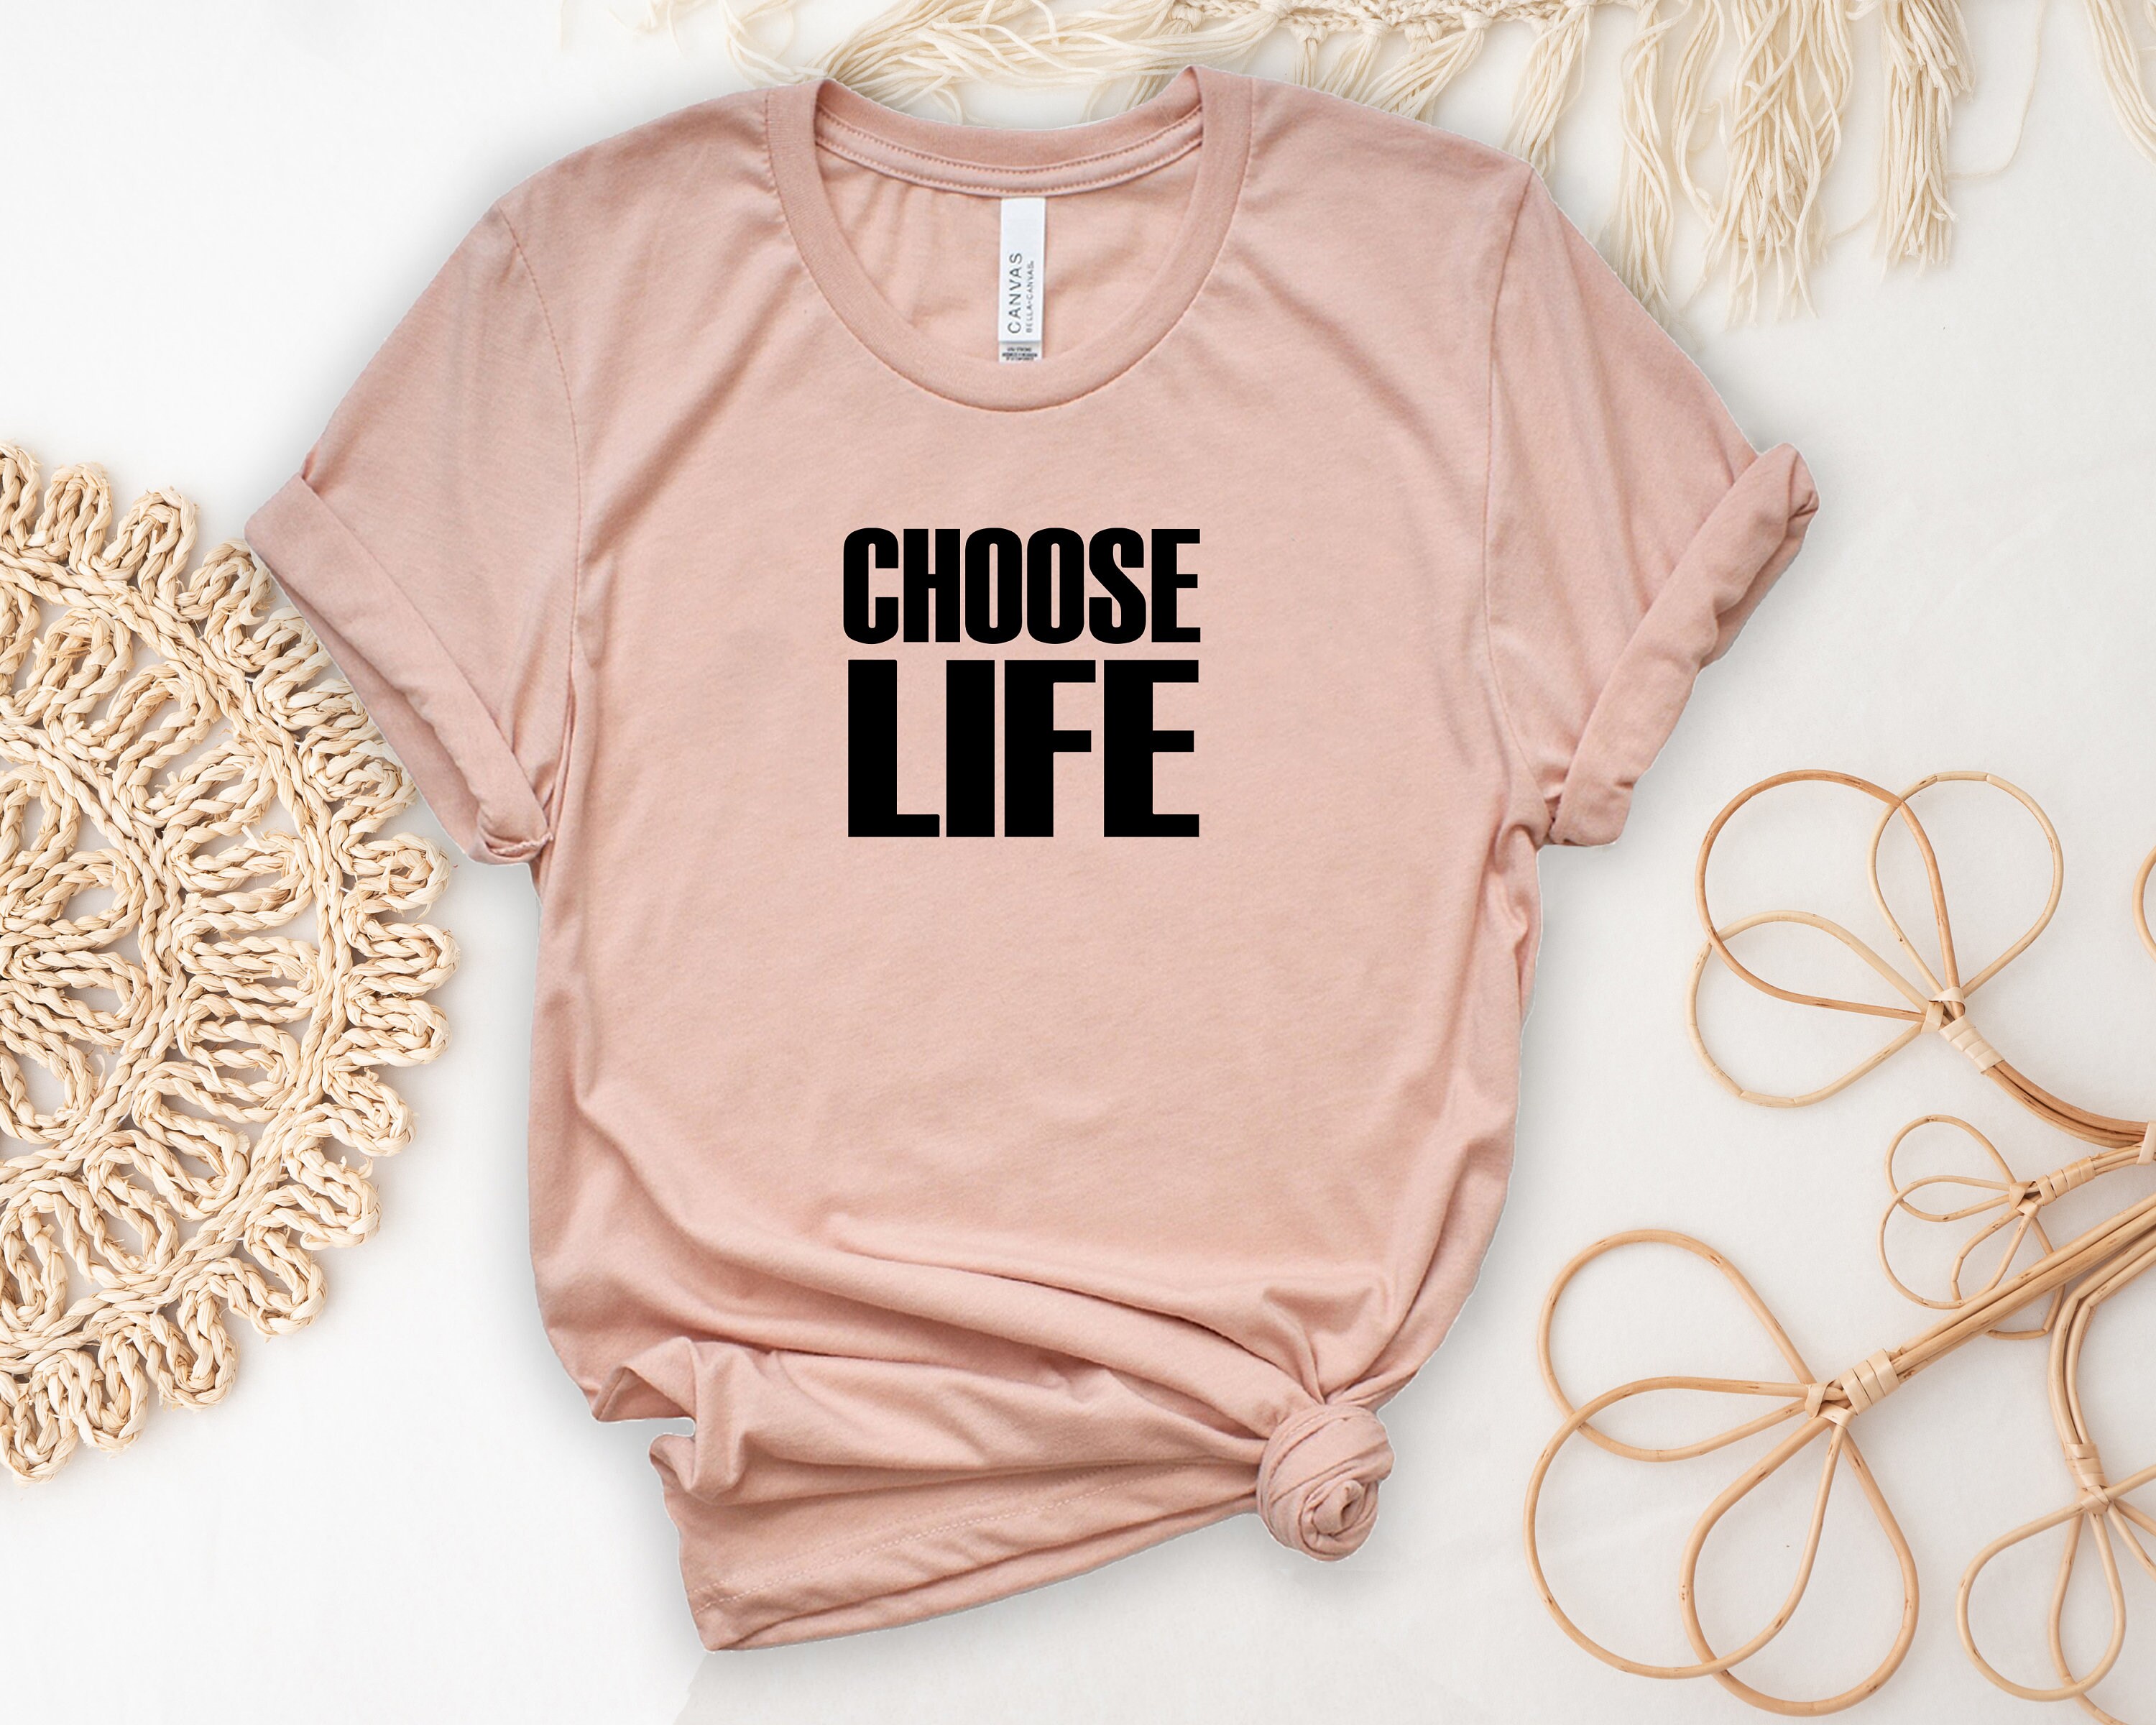 Discover Choose Life T-Shirt, George Michael Shirt, Fancy Wham Retro 80s, Party Outfit, Inspirational Tops